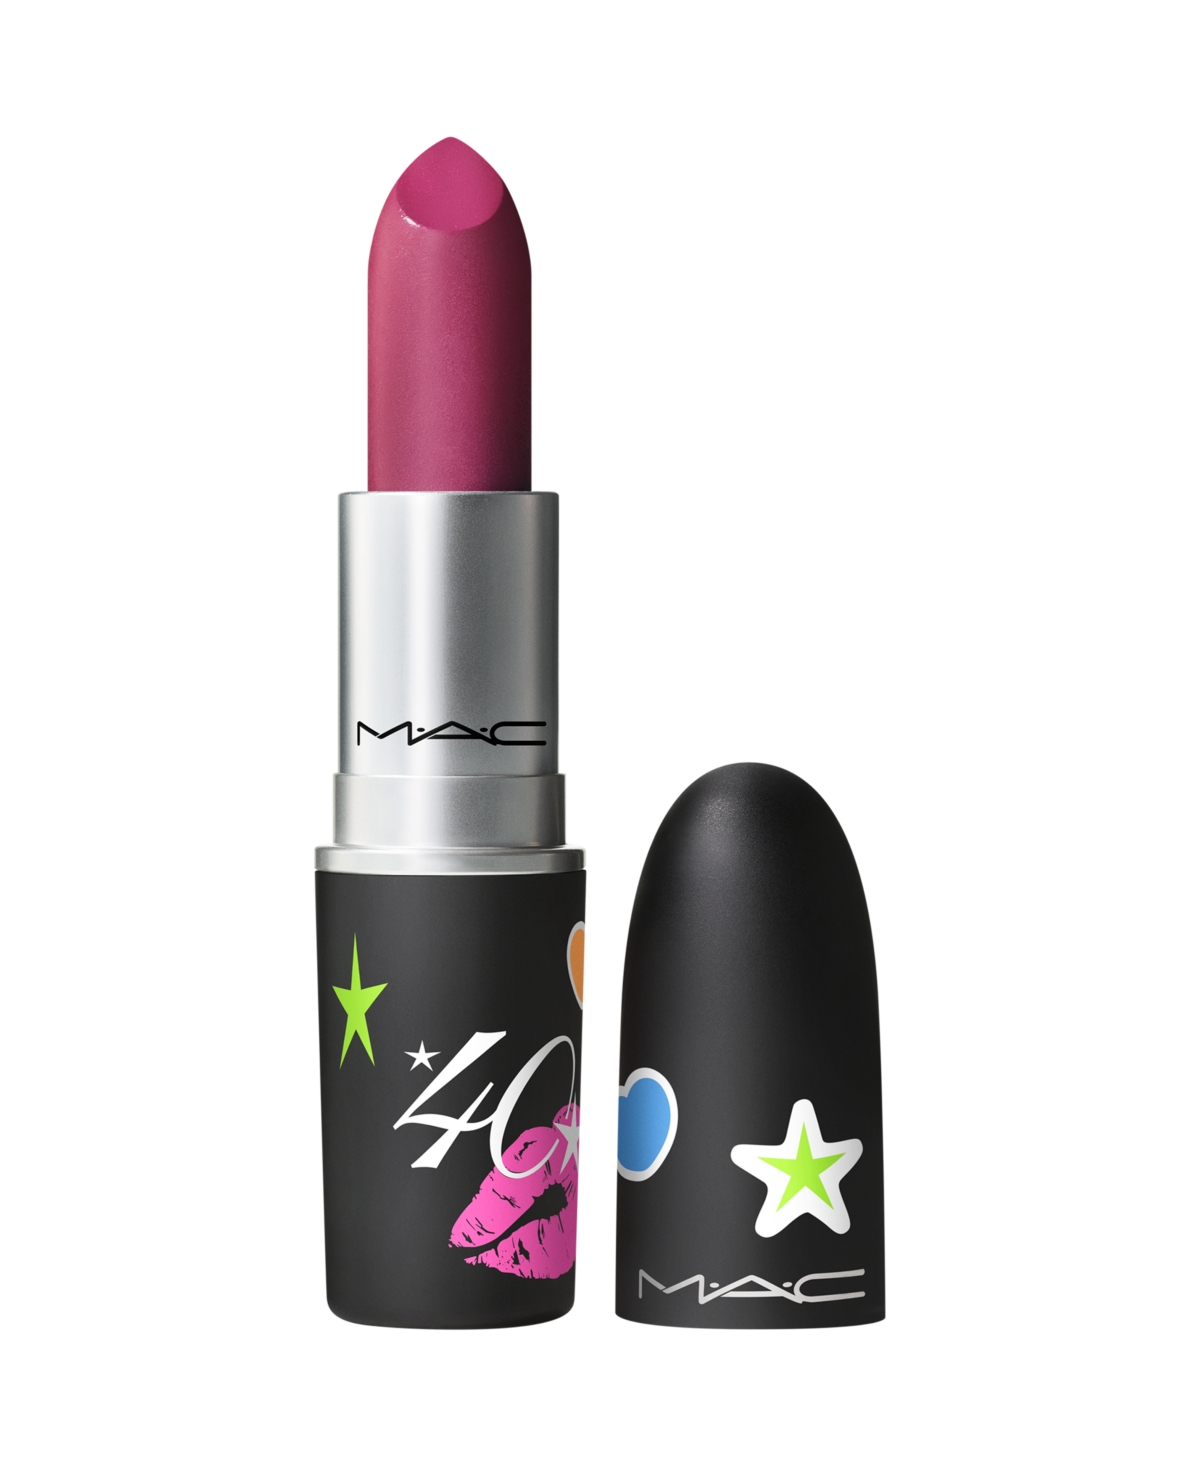 Limited-Edition Amplified Creme Lipstick - Up The Amp